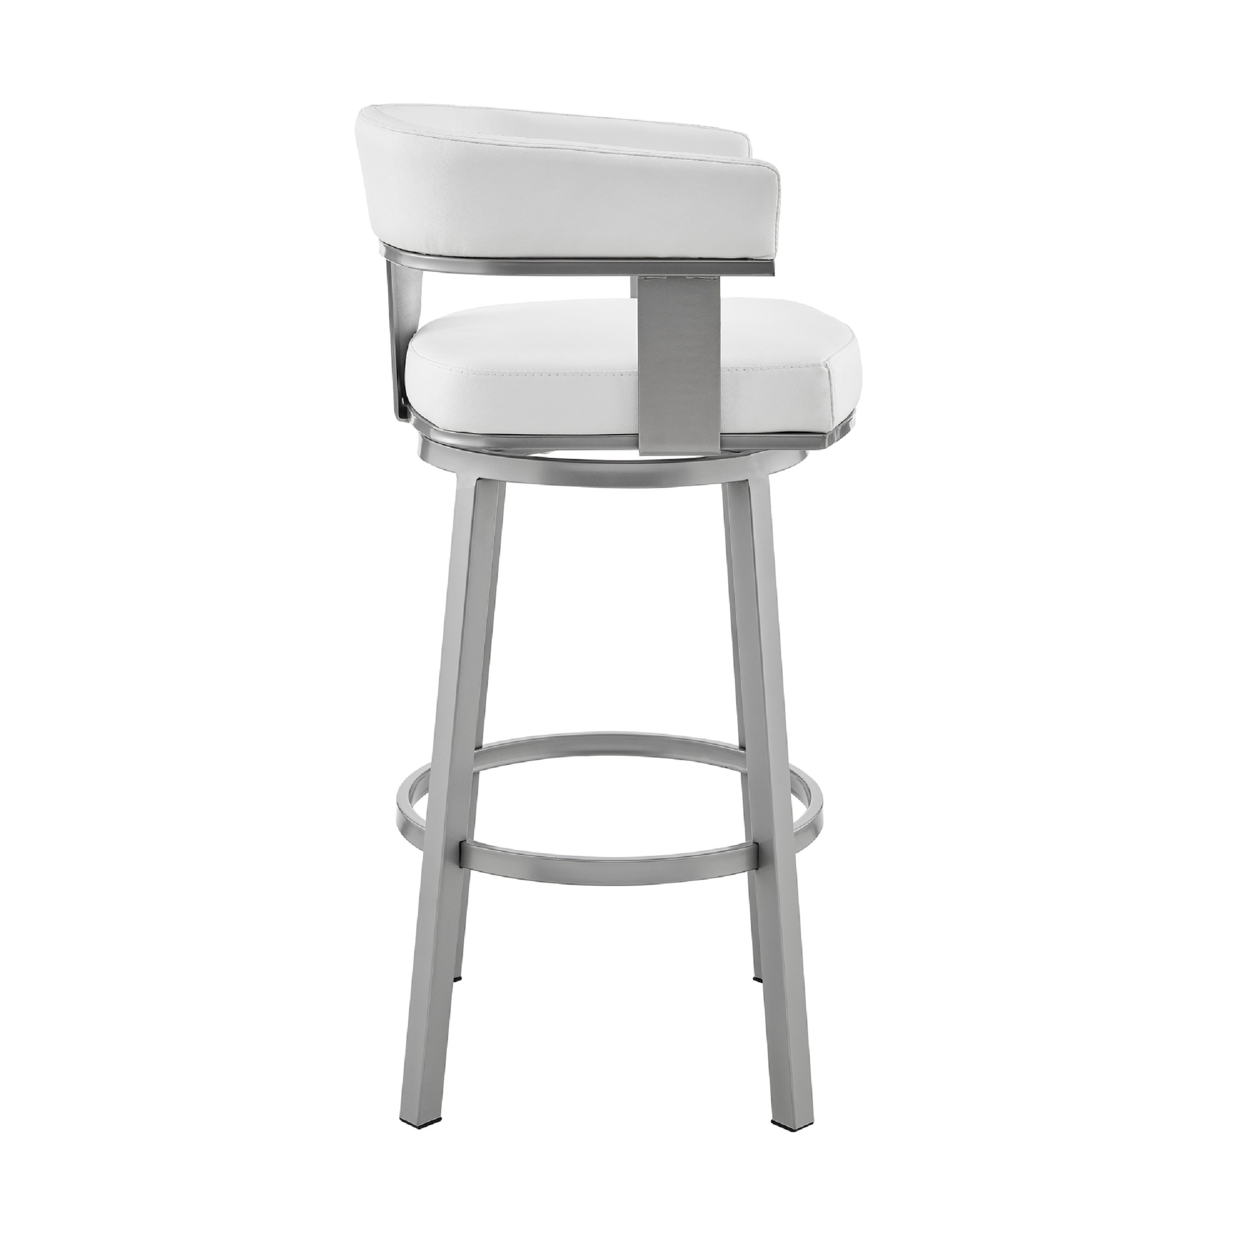 Swivel Barstool With Curved Open Back And Metal Legs, Silver And White- Saltoro Sherpi